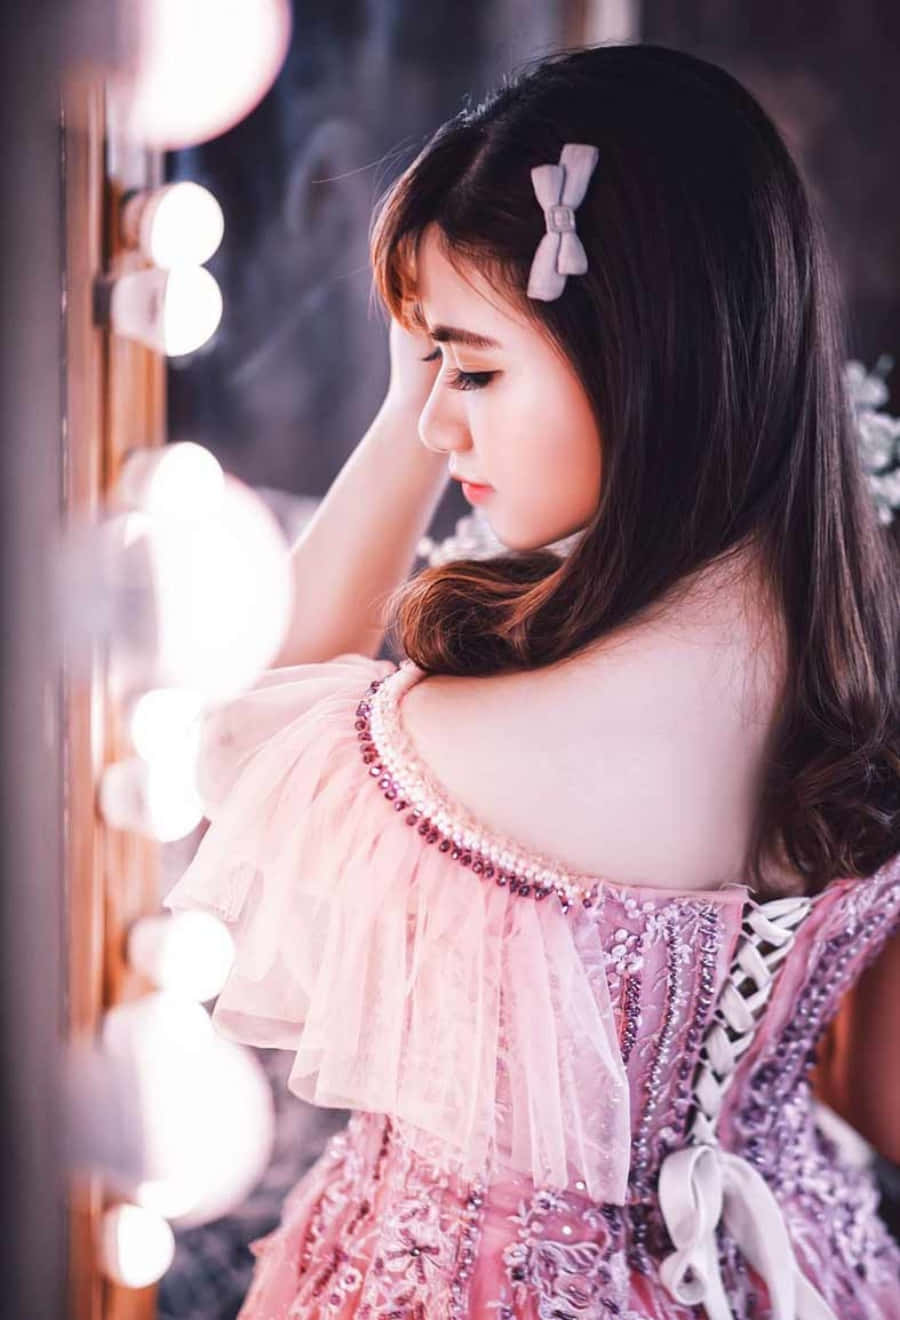 A Girl In A Pink Dress Looking At The Mirror